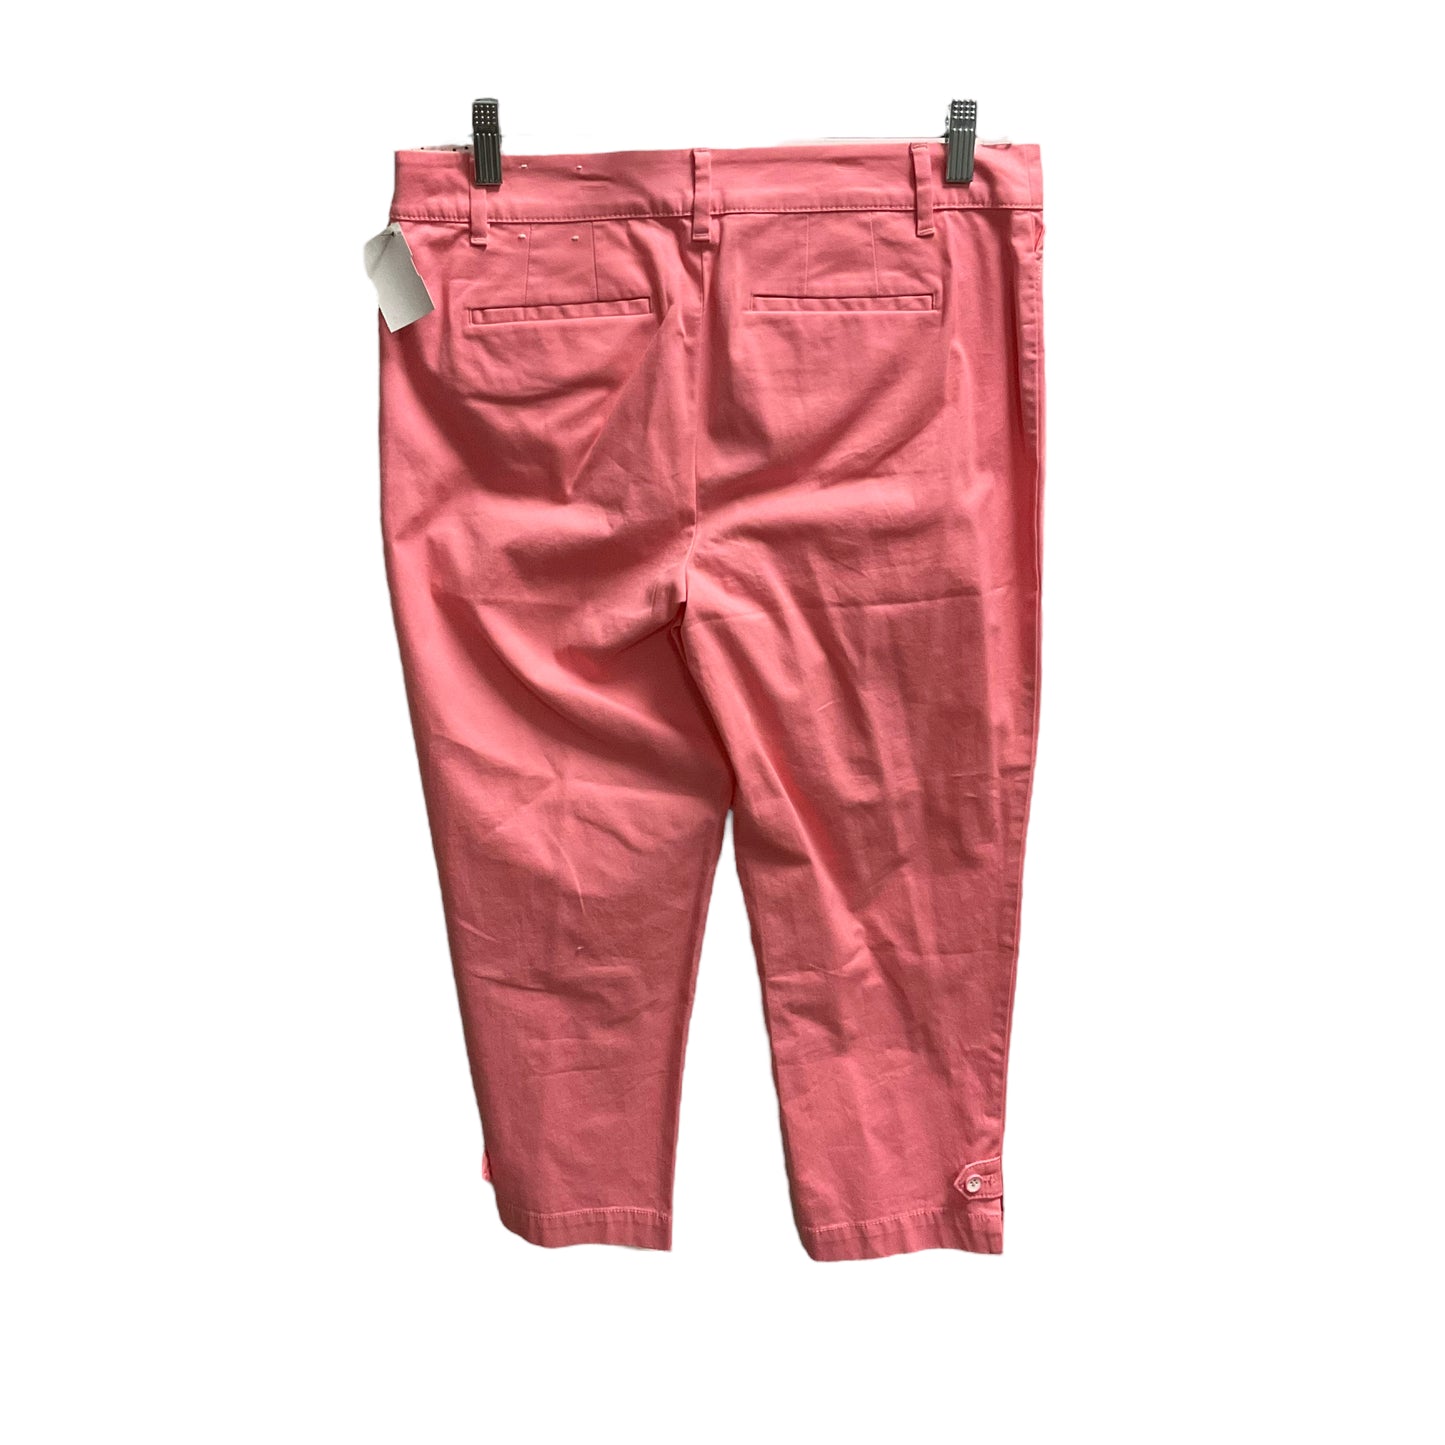 Pants Cropped By Talbots  Size: 6petite